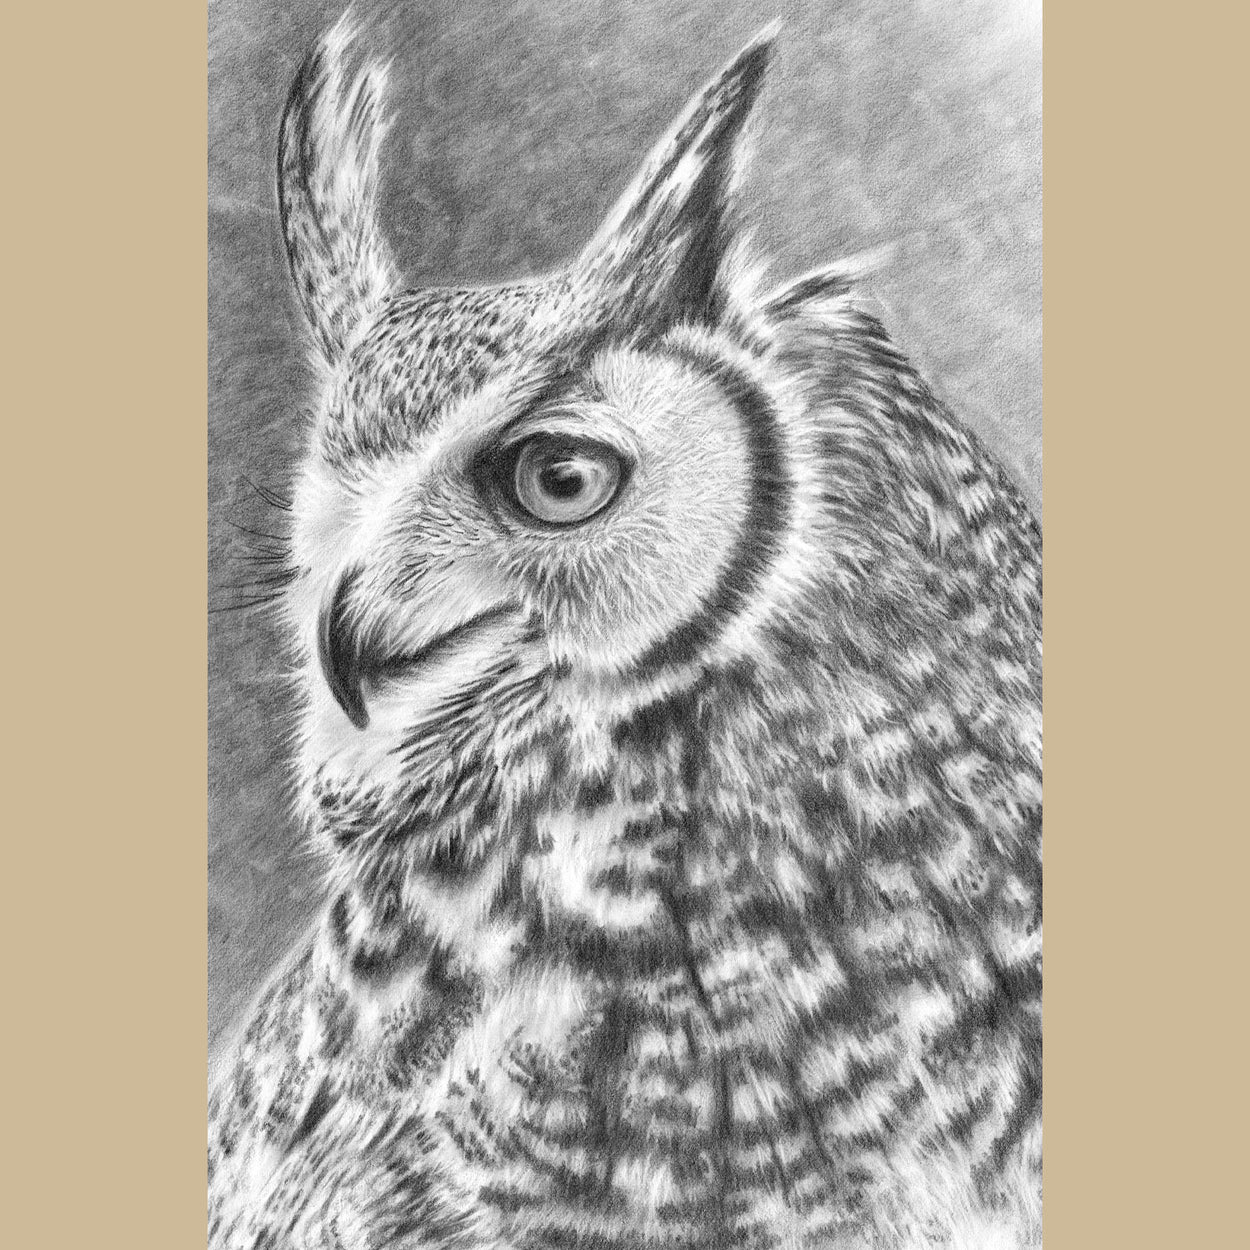 Great Horned Owl Drawing Close-up 1 - The Thriving Wild